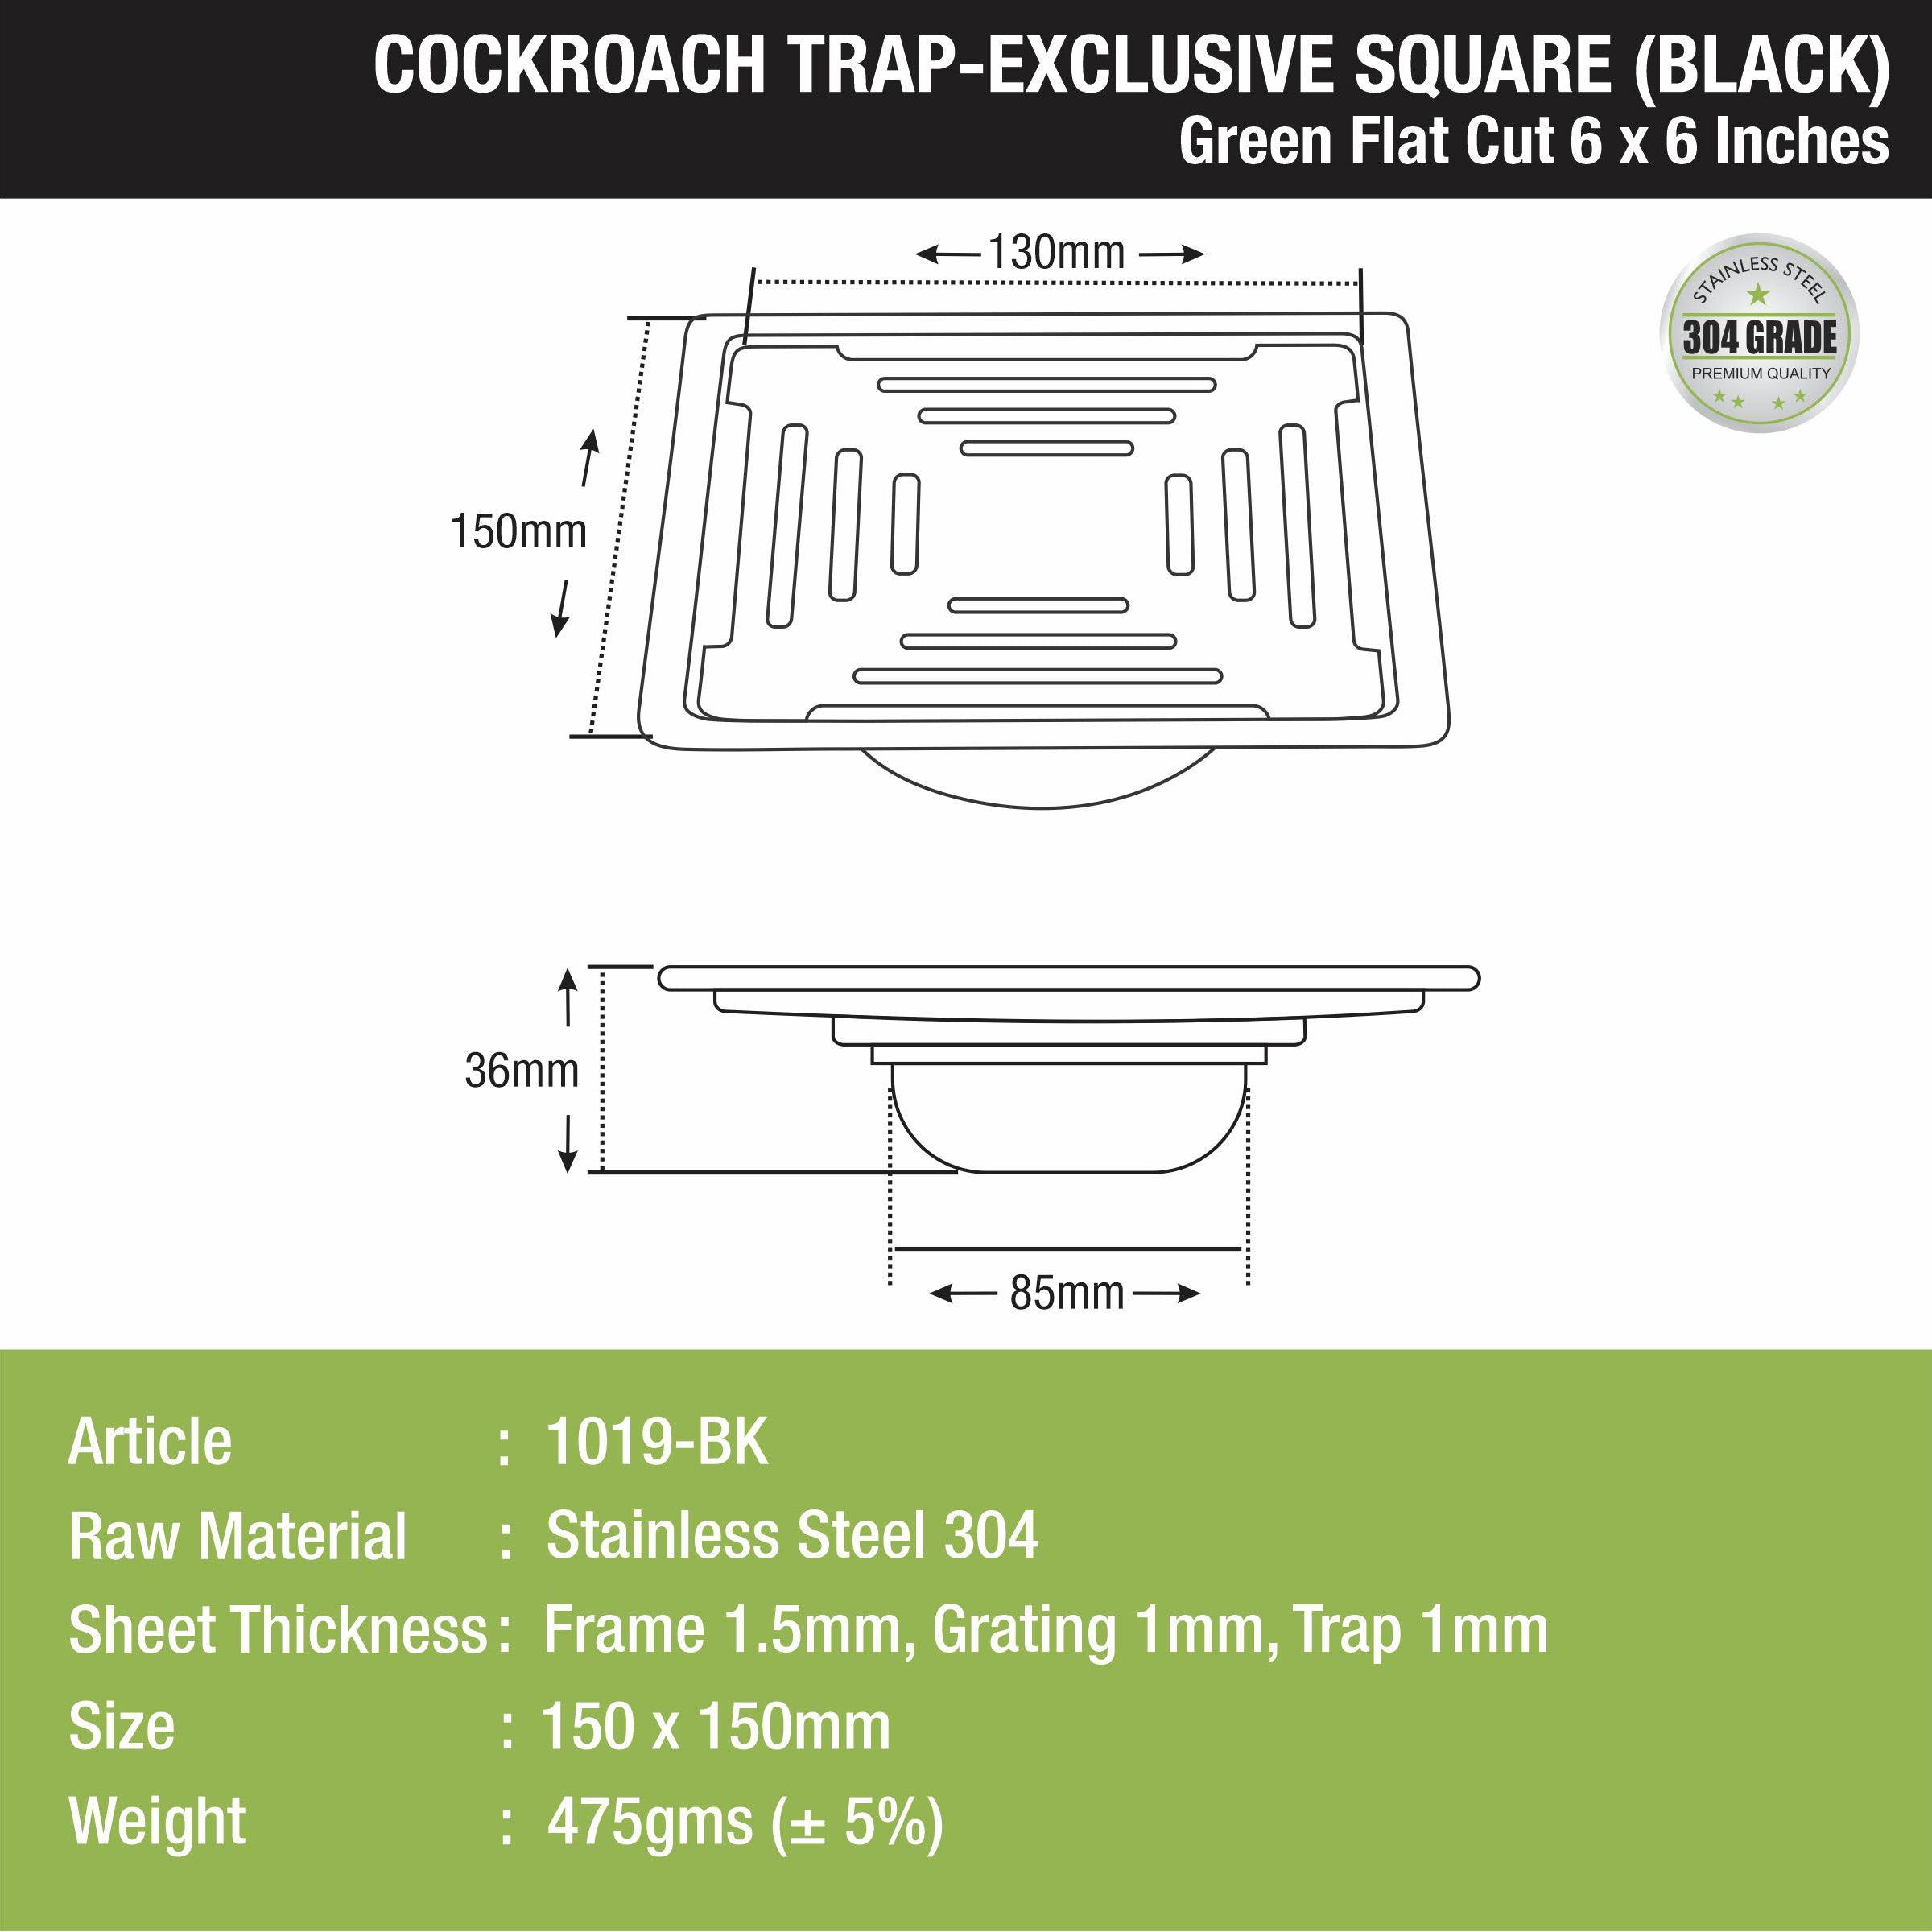 Green Exclusive Square Flat Cut Floor Drain in Black PVD Coating (6 x 6 Inches) with Cockroach Trap size and measurement 